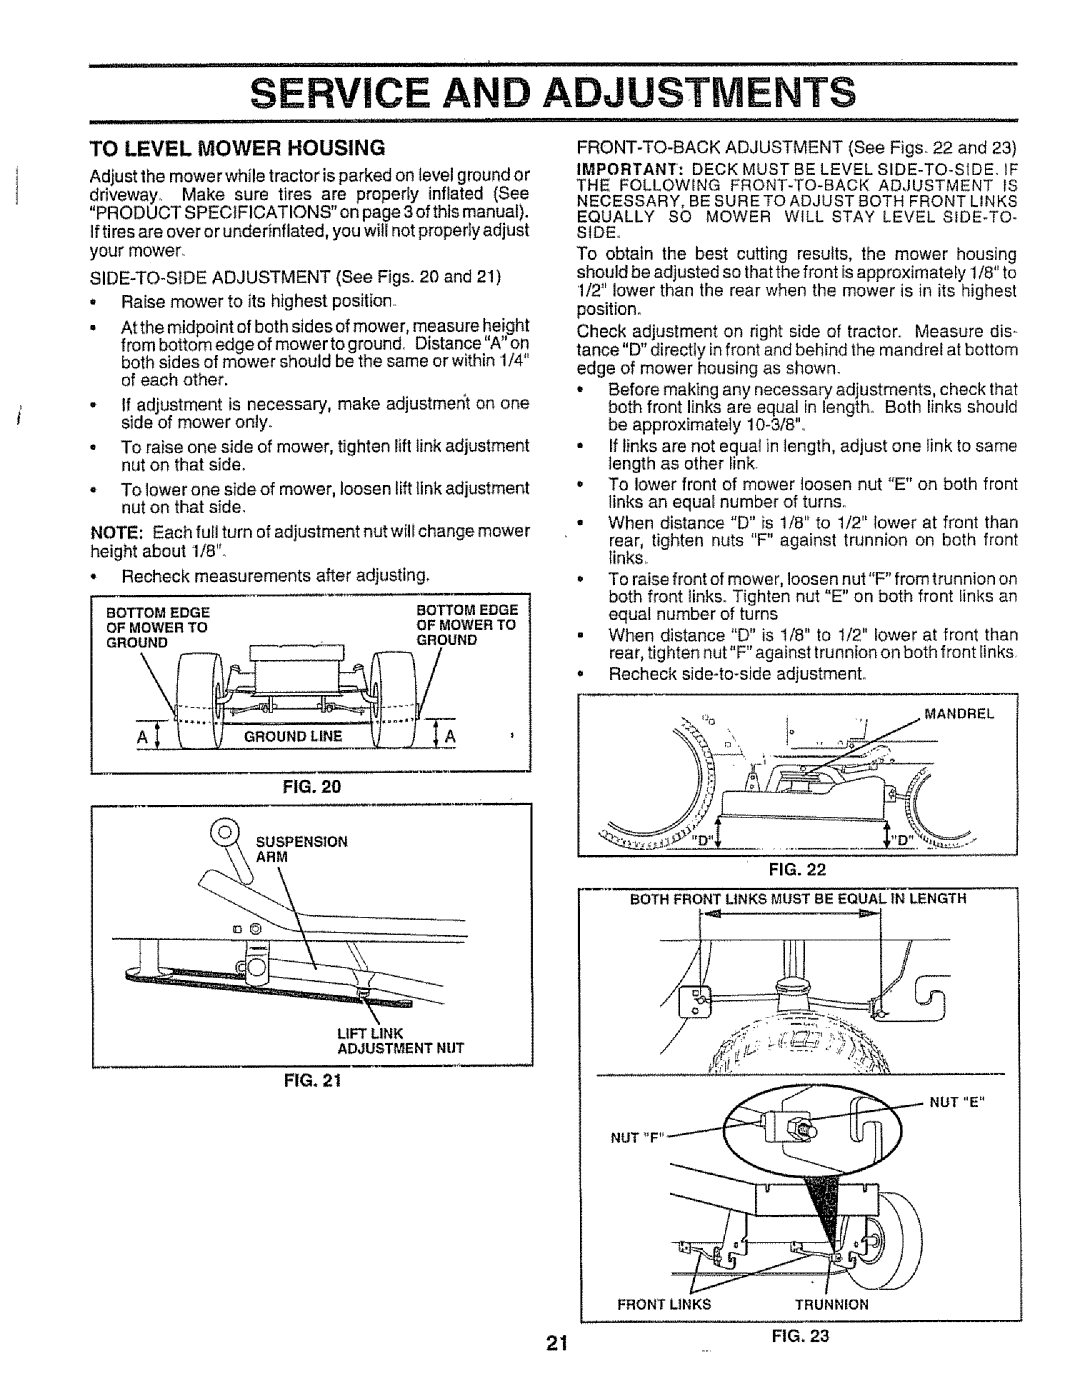 Sears 917.258542 owner manual Rvice An Adjustments, To Level Mower Housing, O, Fig 